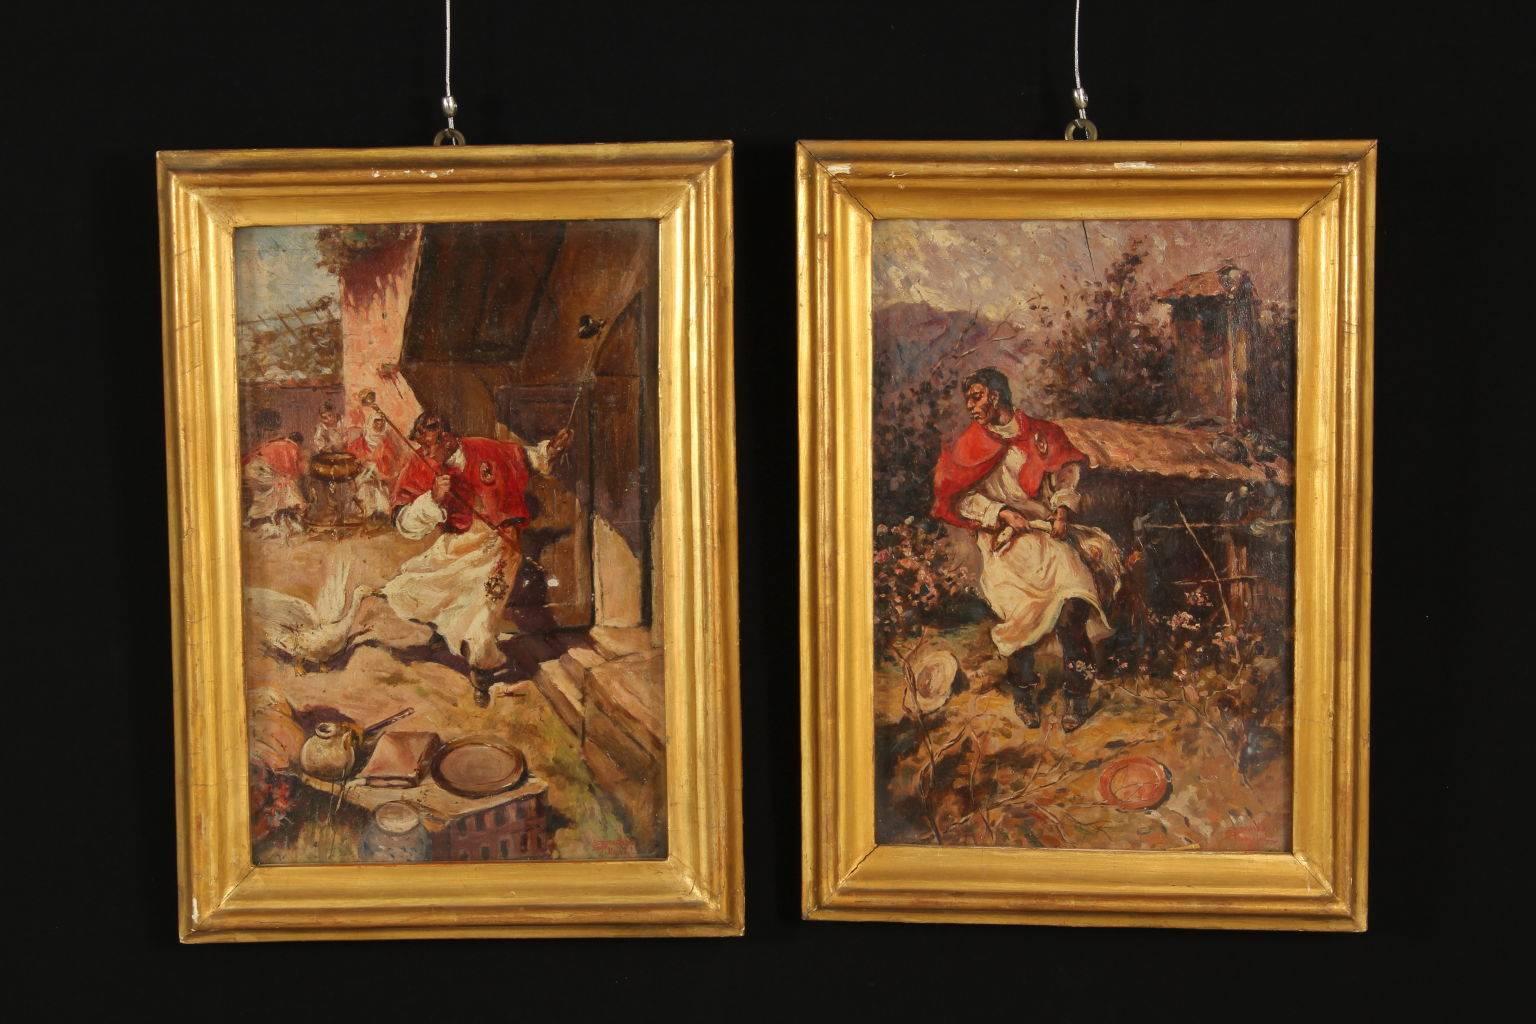 A pair of paintings by Riccardo Pellegrini, oil on board. 'The offense and the punishment'. Signed on the right bottom corner. In the first painting a goose attacks a cleric who, in the second painting, punishes the animal. This subject was repeated